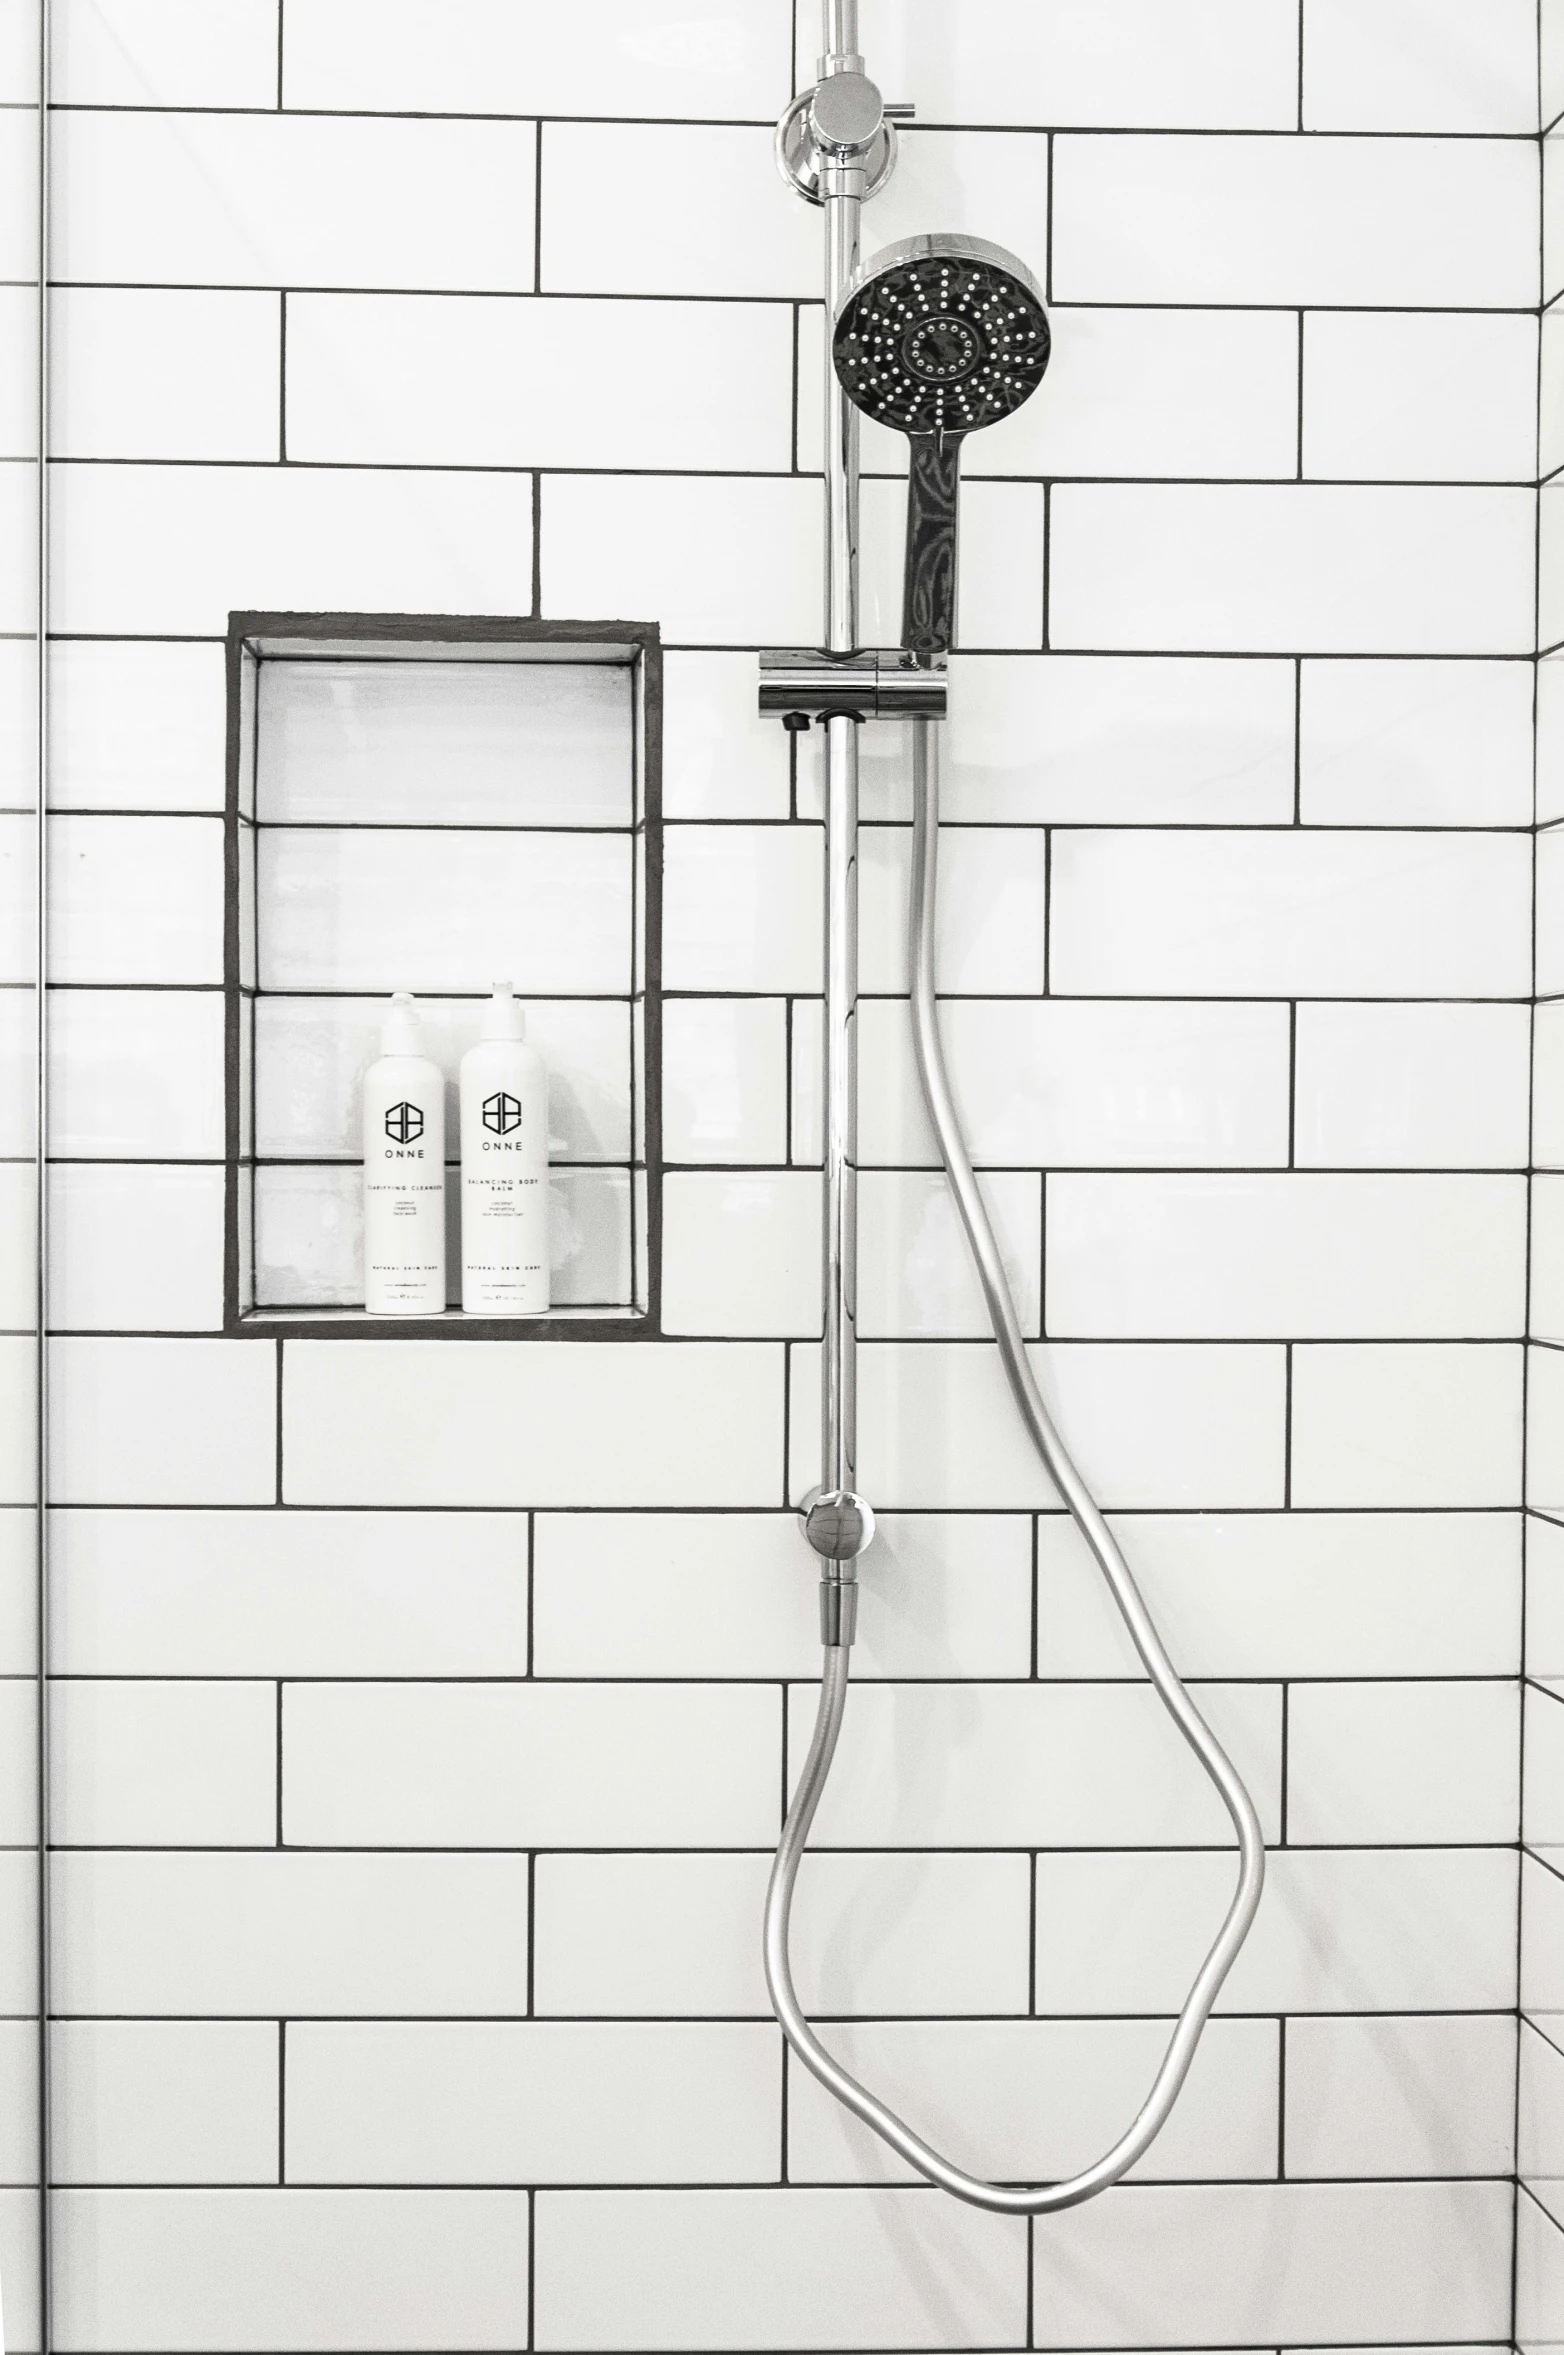 a shower head in the shower with the handle extended